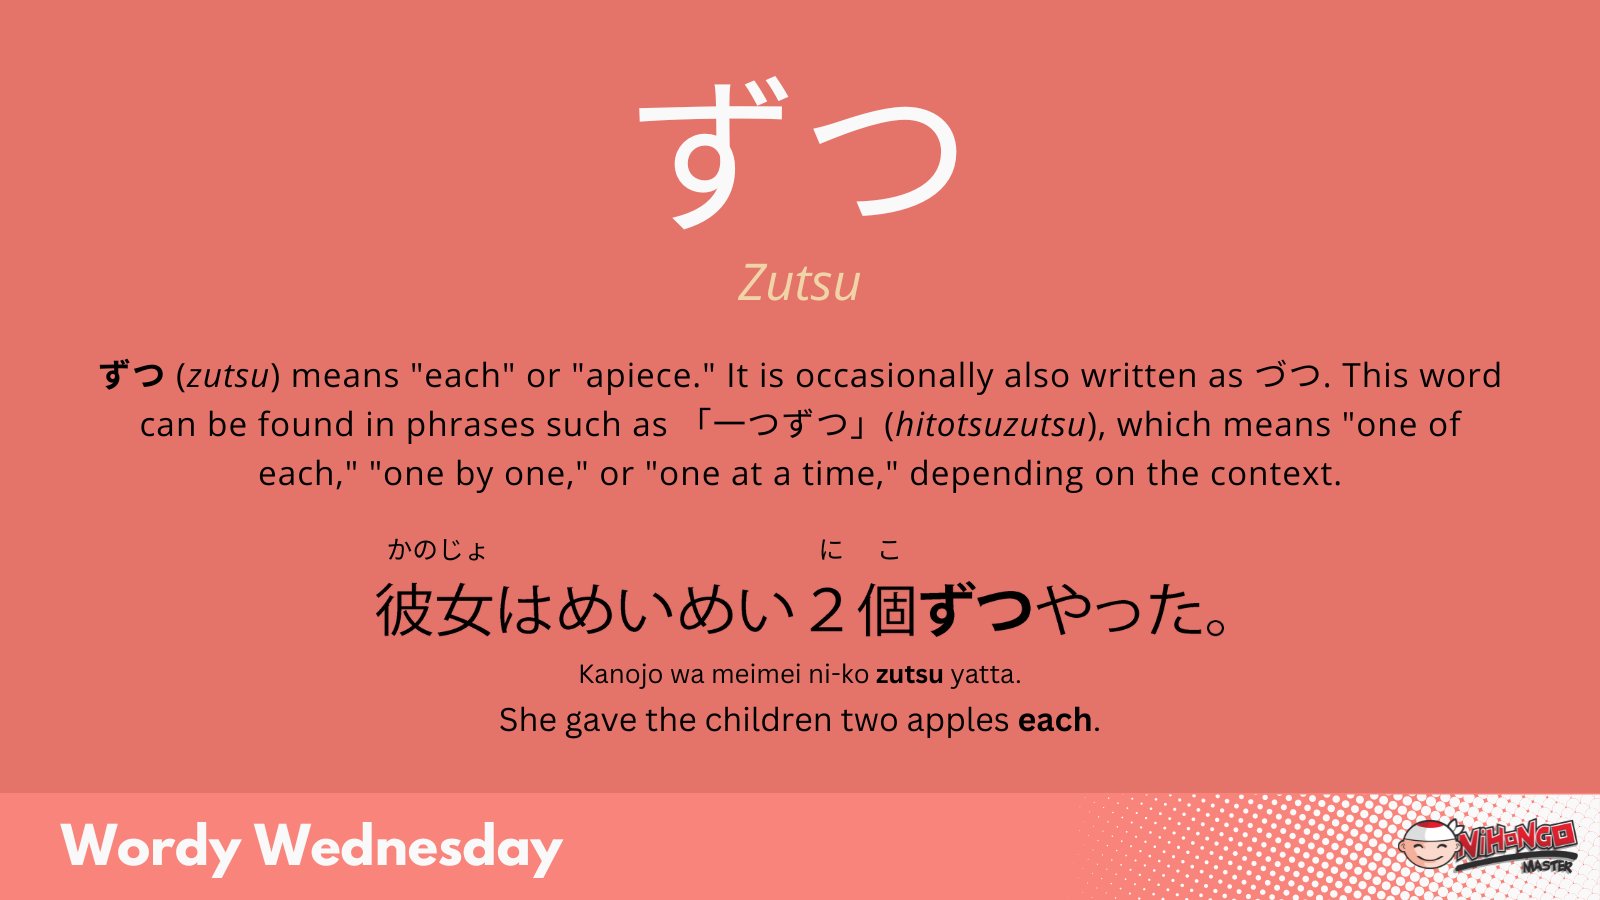 Japanese Words like Sugoi Which Have Multiple Meanings